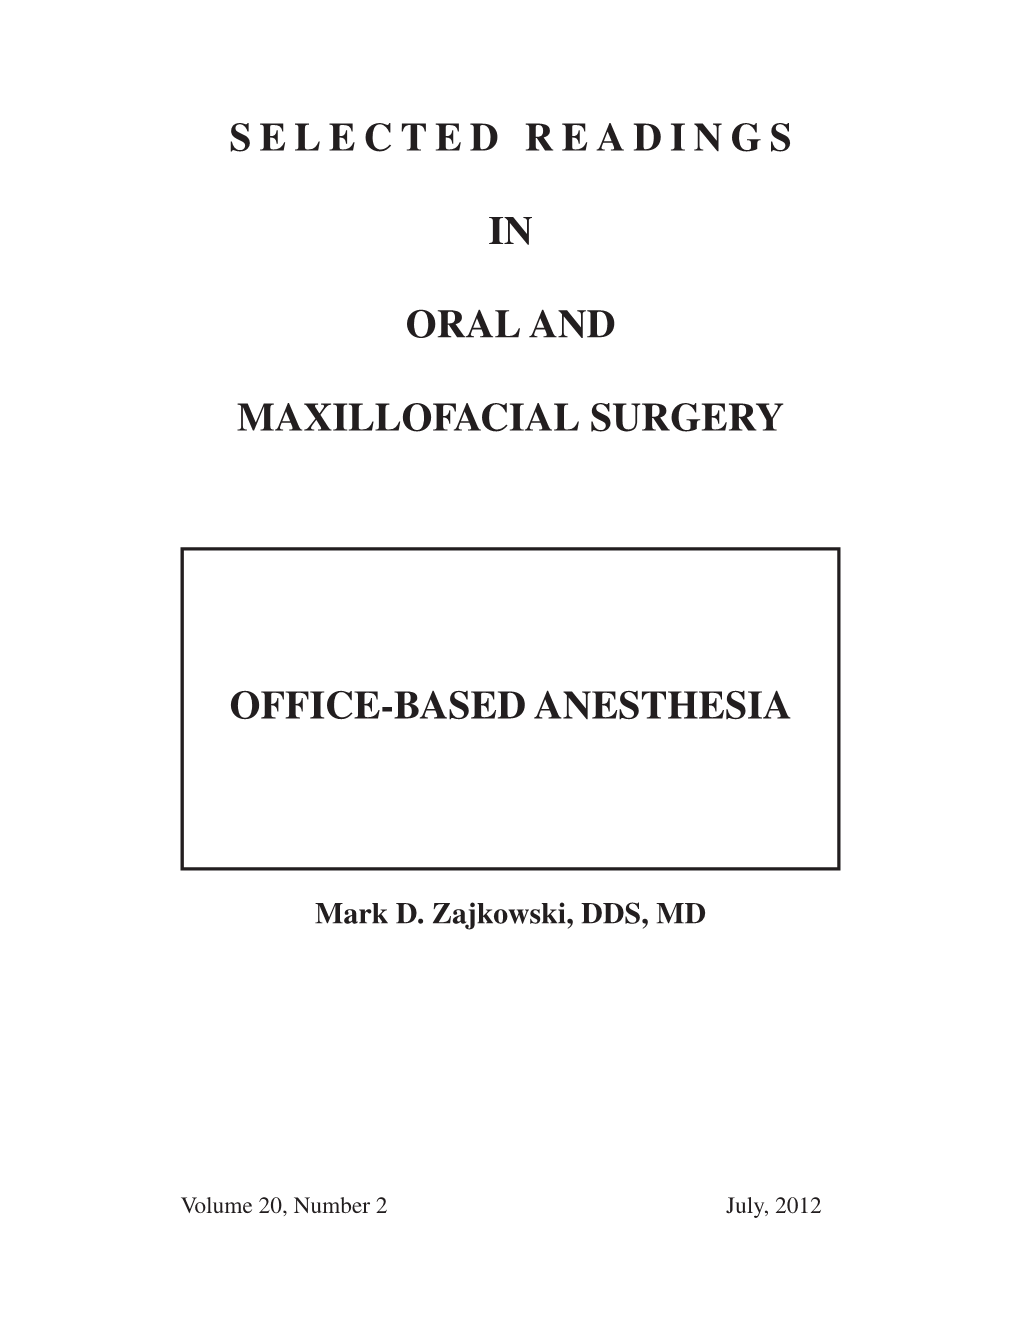 Selected Readings in Oral and Maxillofacial Surgery Will Focus on Anesthesia in an Office-Based Setting in Particular